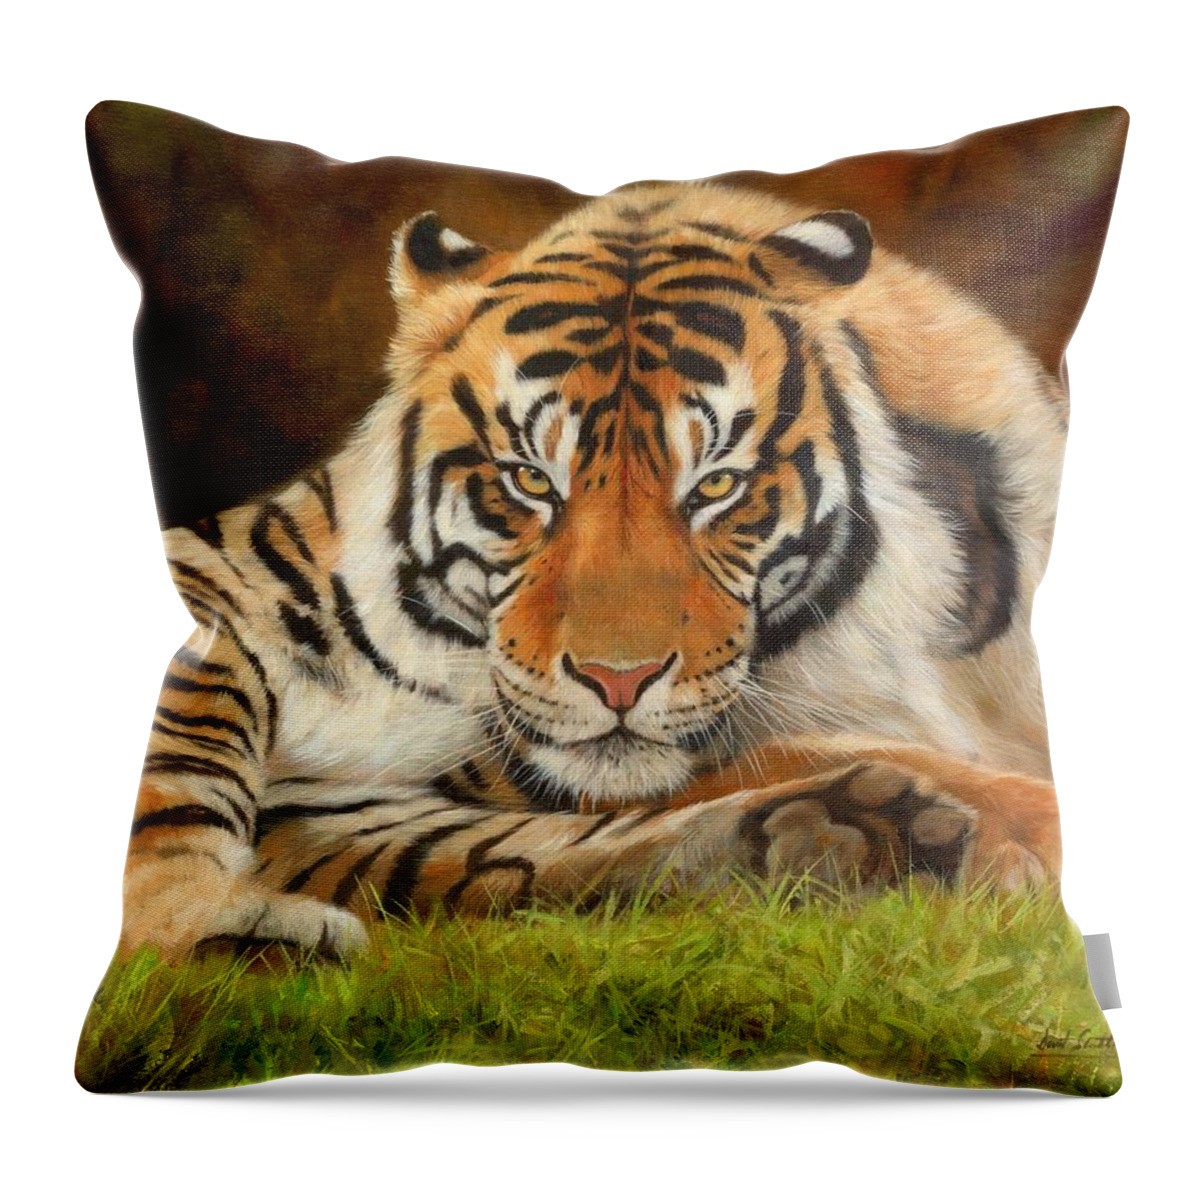 Tiger Throw Pillow featuring the painting Look Into My Eyes by David Stribbling